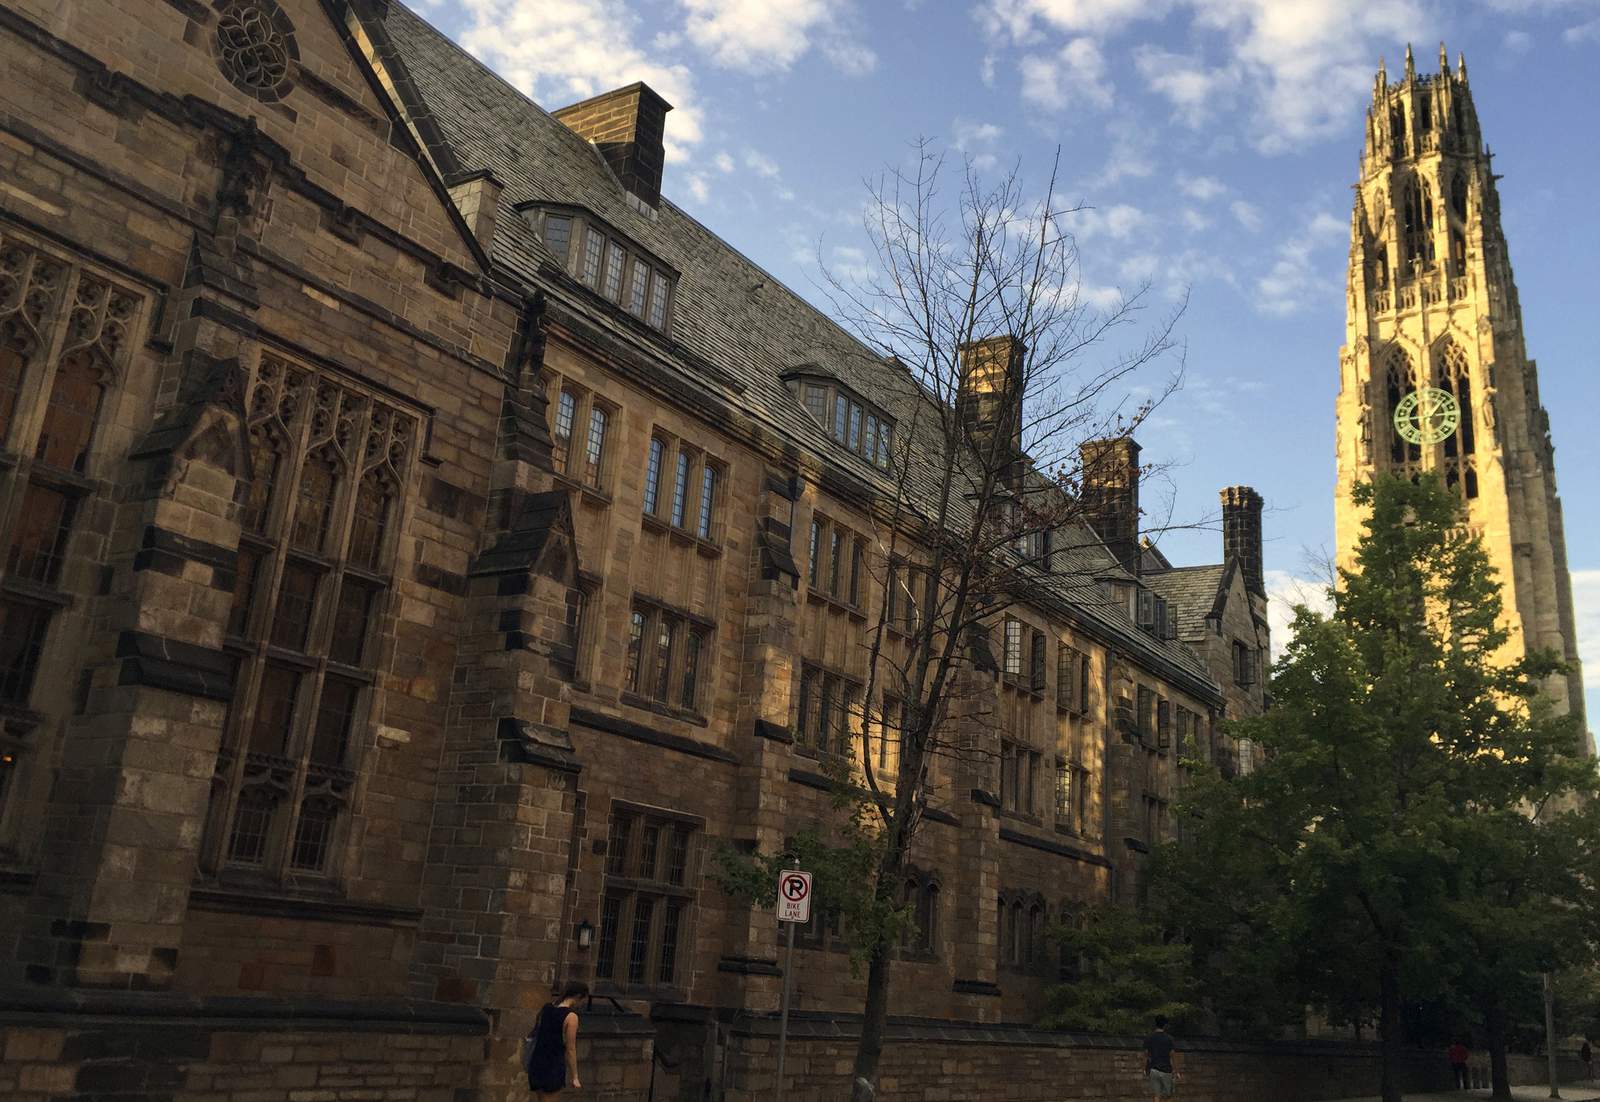 Feds accuse Yale of discriminating against some applicants